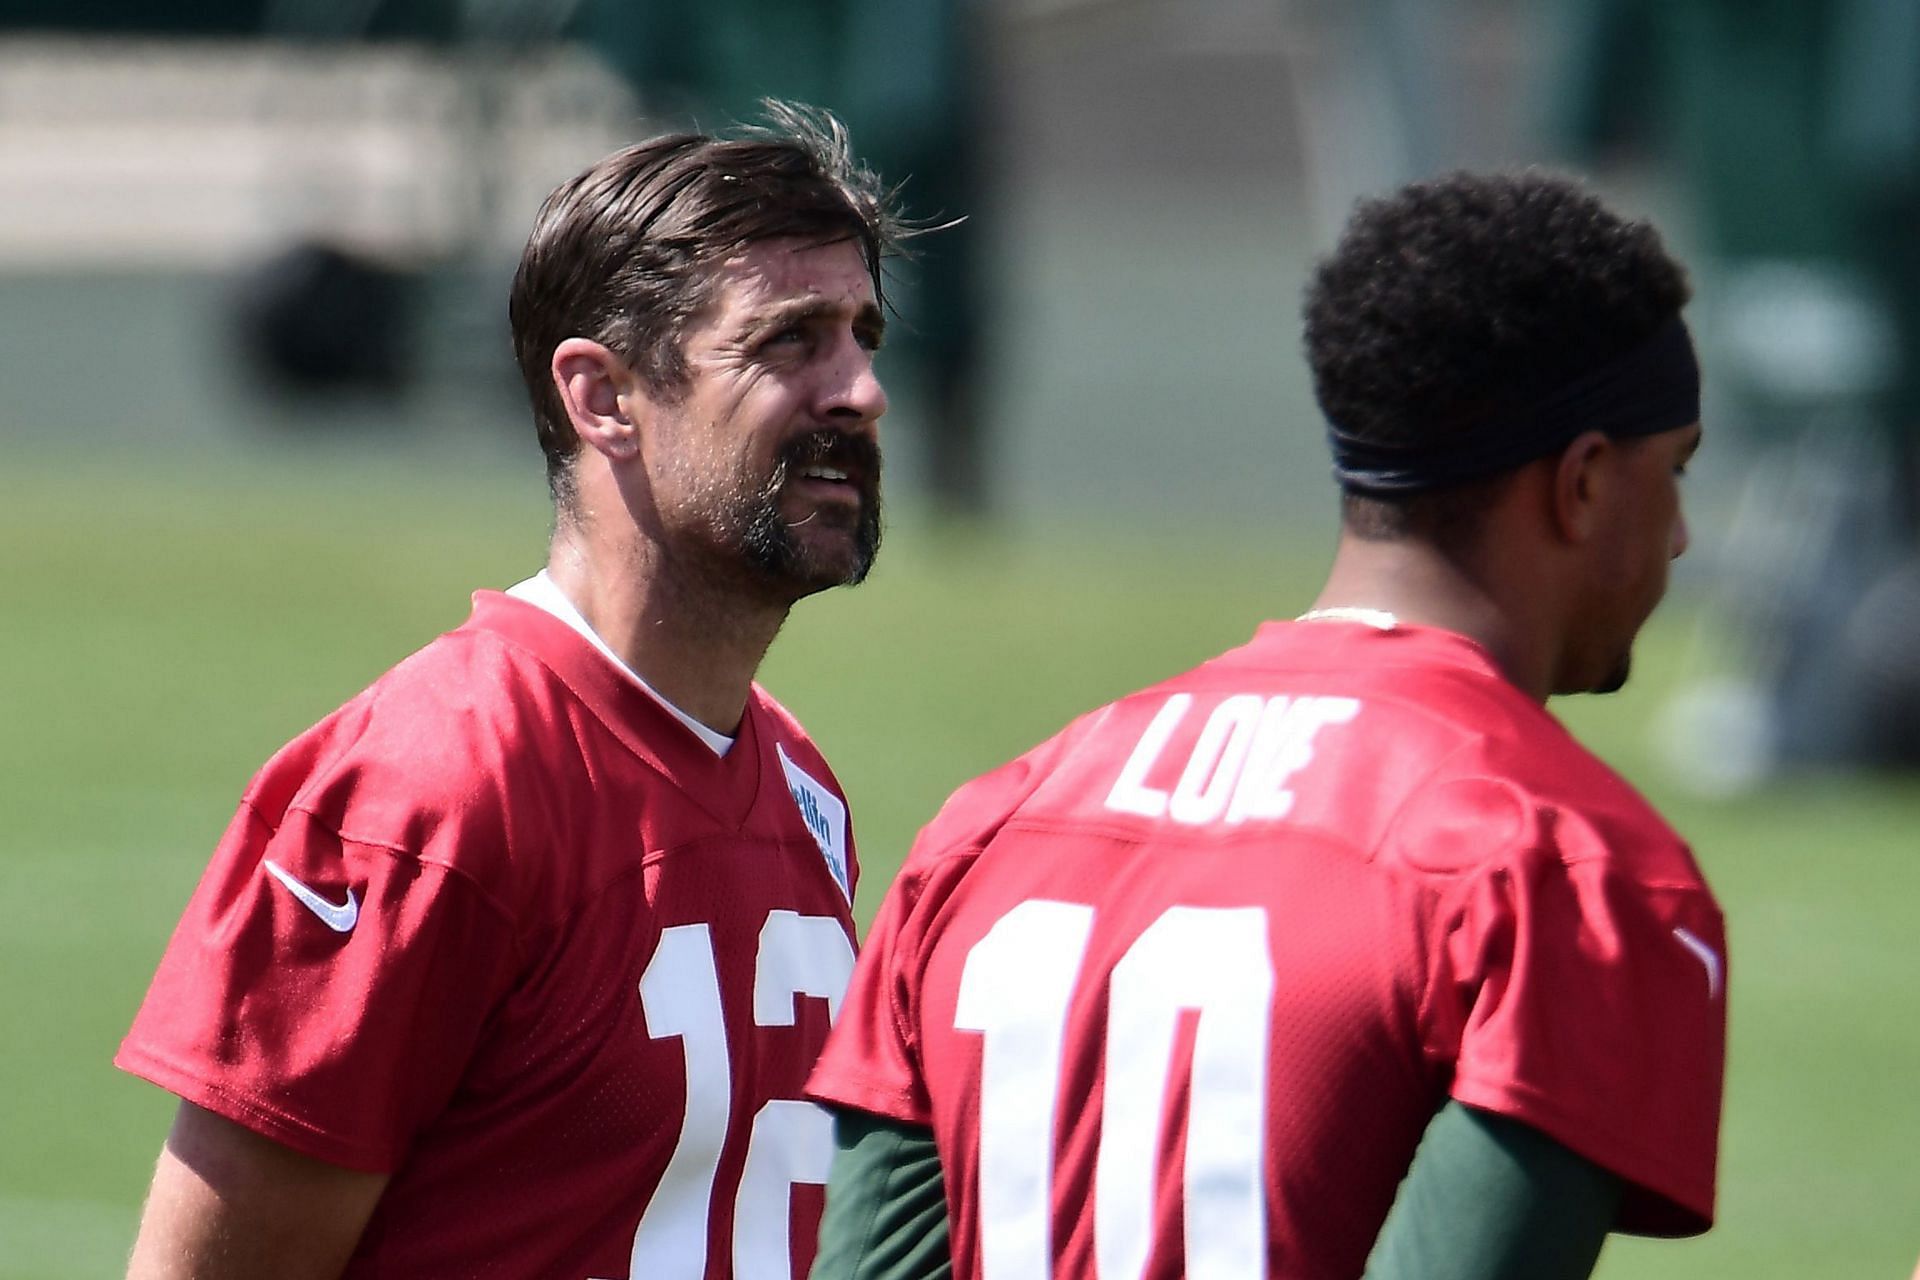 Aaron Rodgers and Jordan Love in Green Bay Packers Training Camp